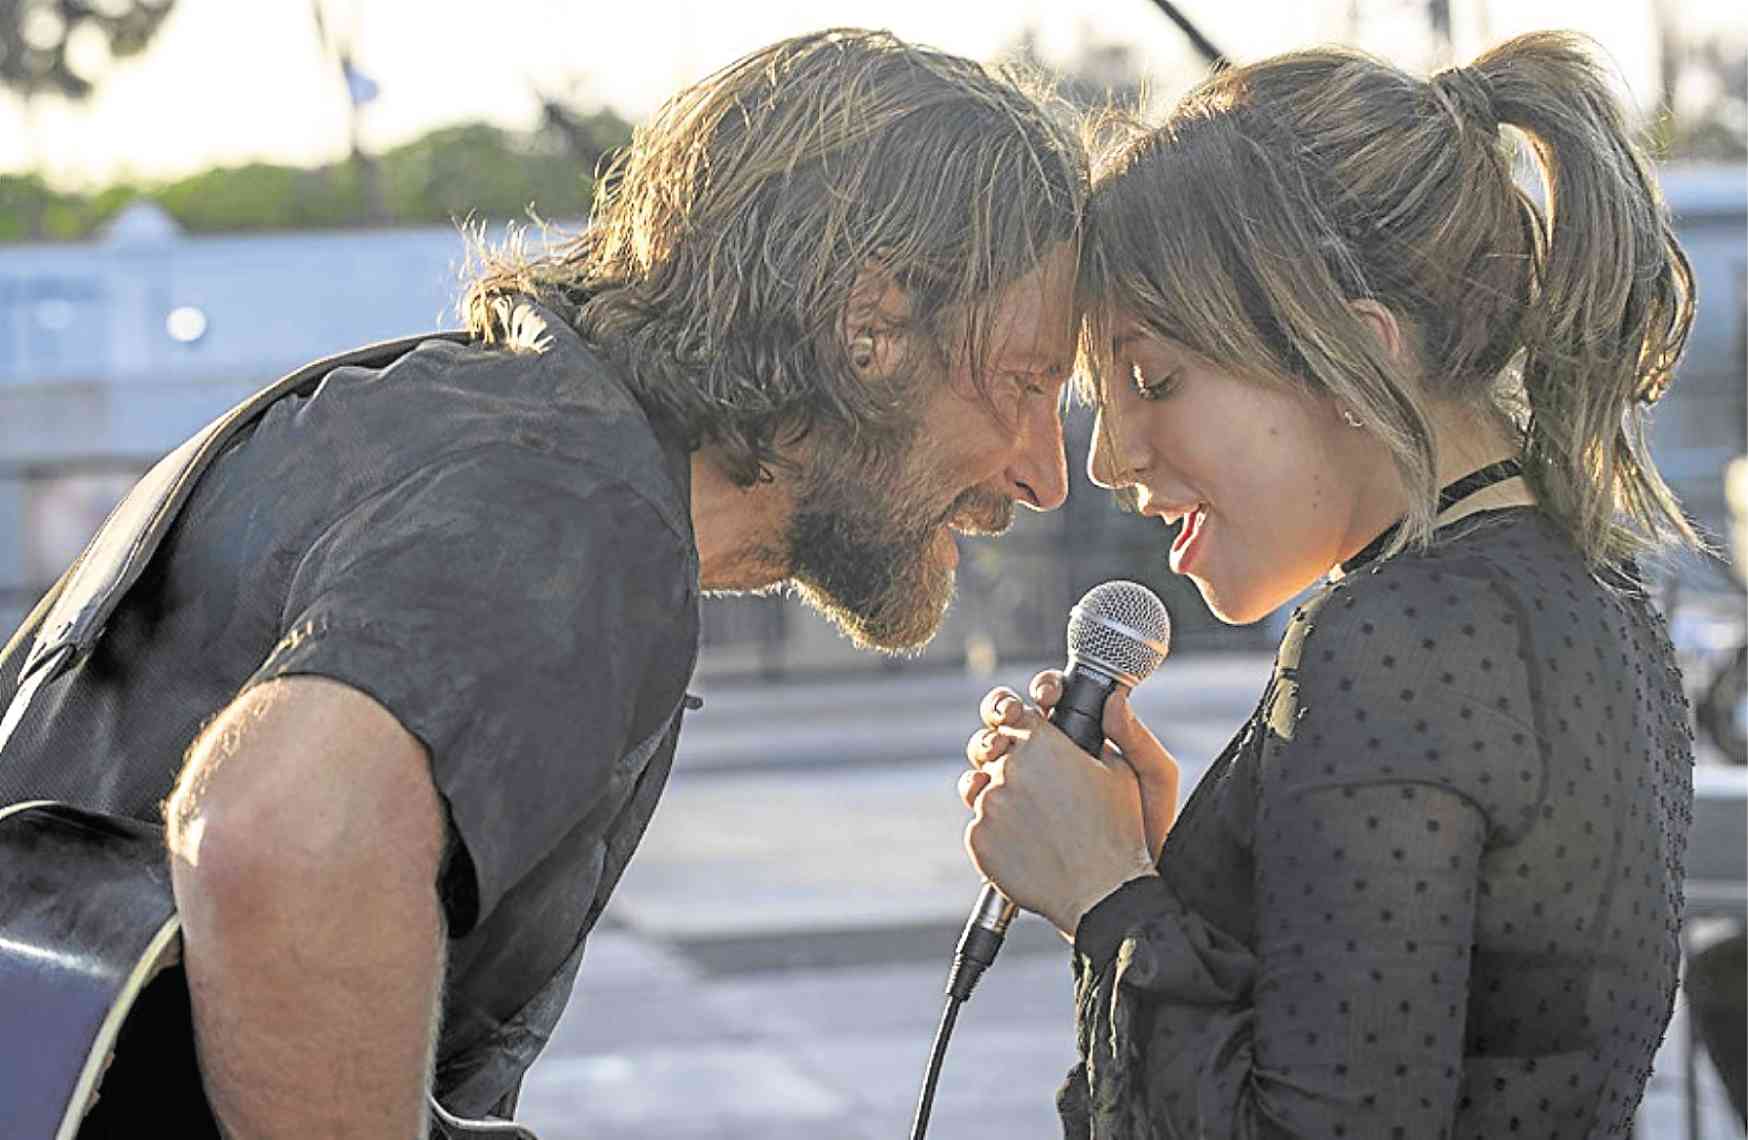 Bradley Cooper-Lady Gaga duet, Queen number among Oscar night’s most anticipated moments